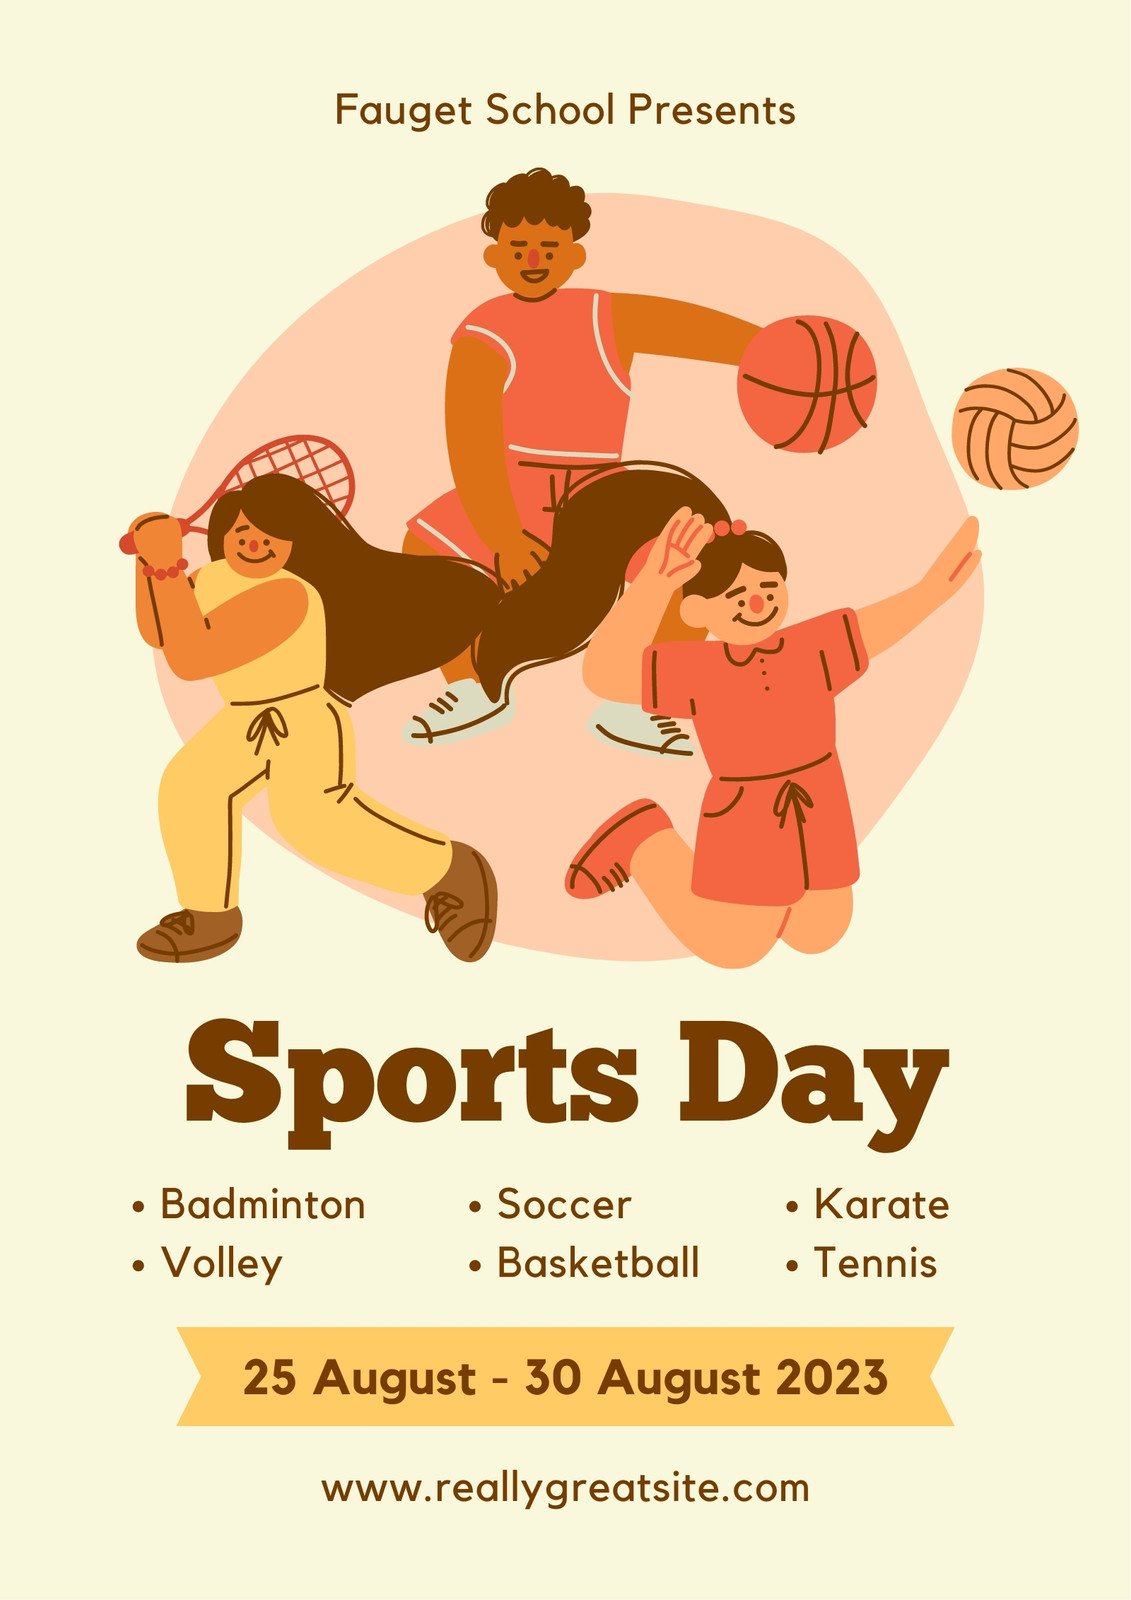 music video school sports day clipart